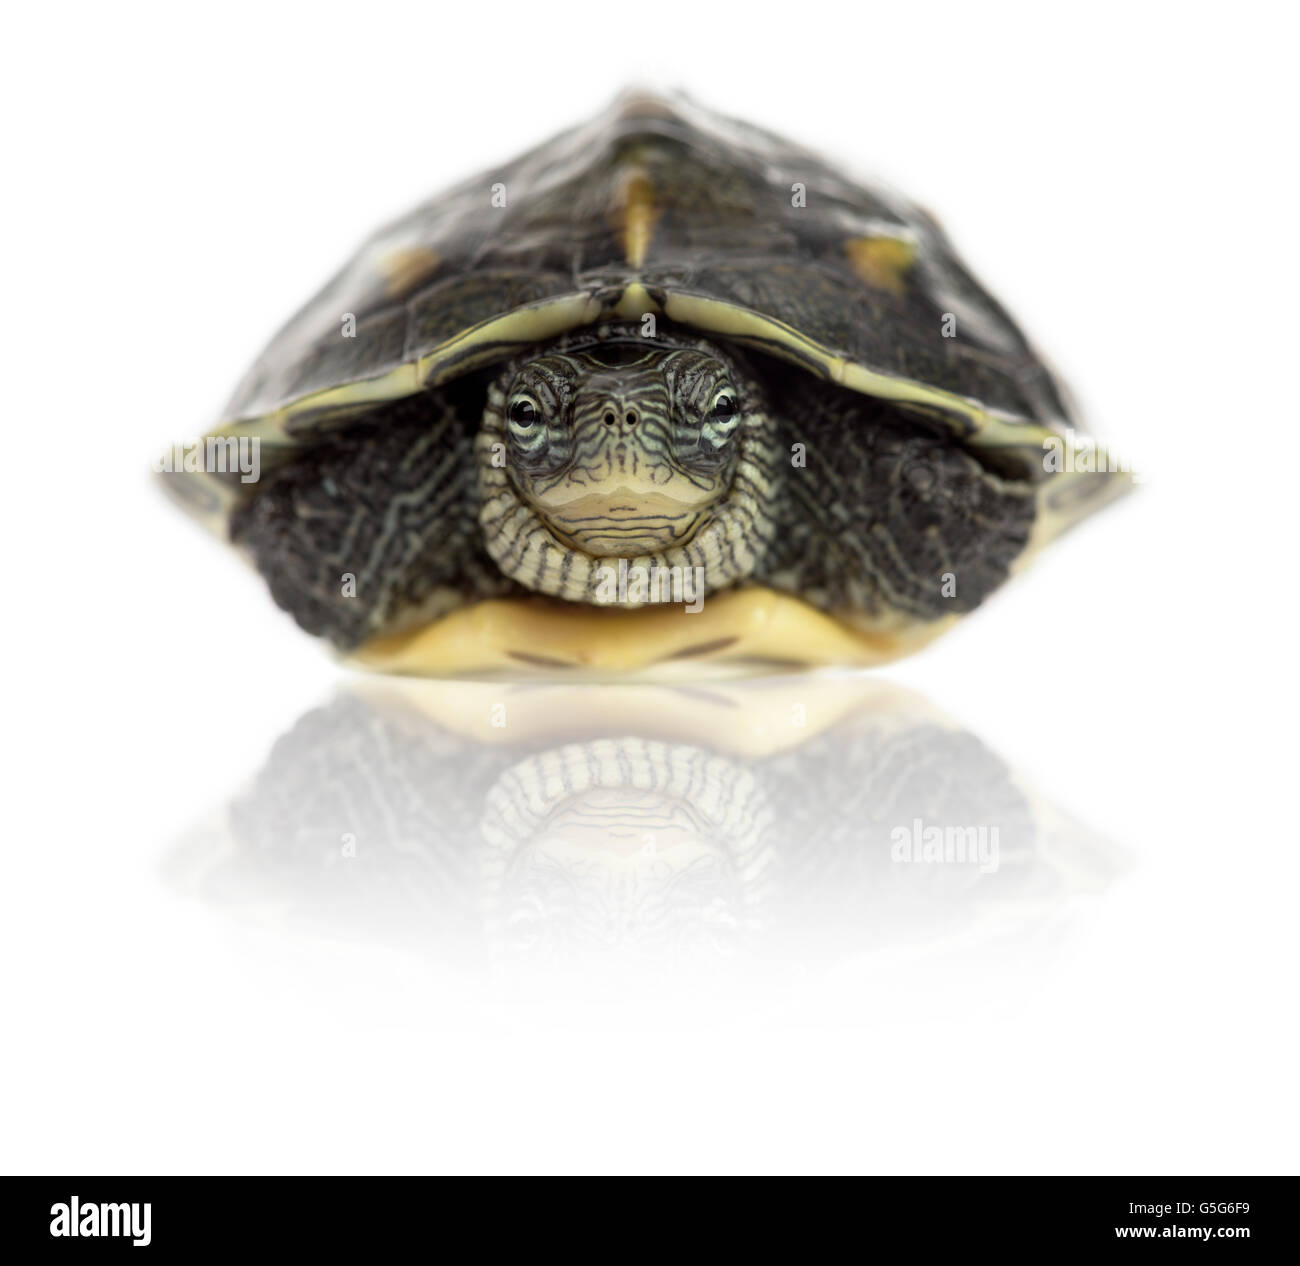 Chinese stripe-necked turtle (1 year old), Ocadia sinensis, hiding in its shell in front of a white background Stock Photo